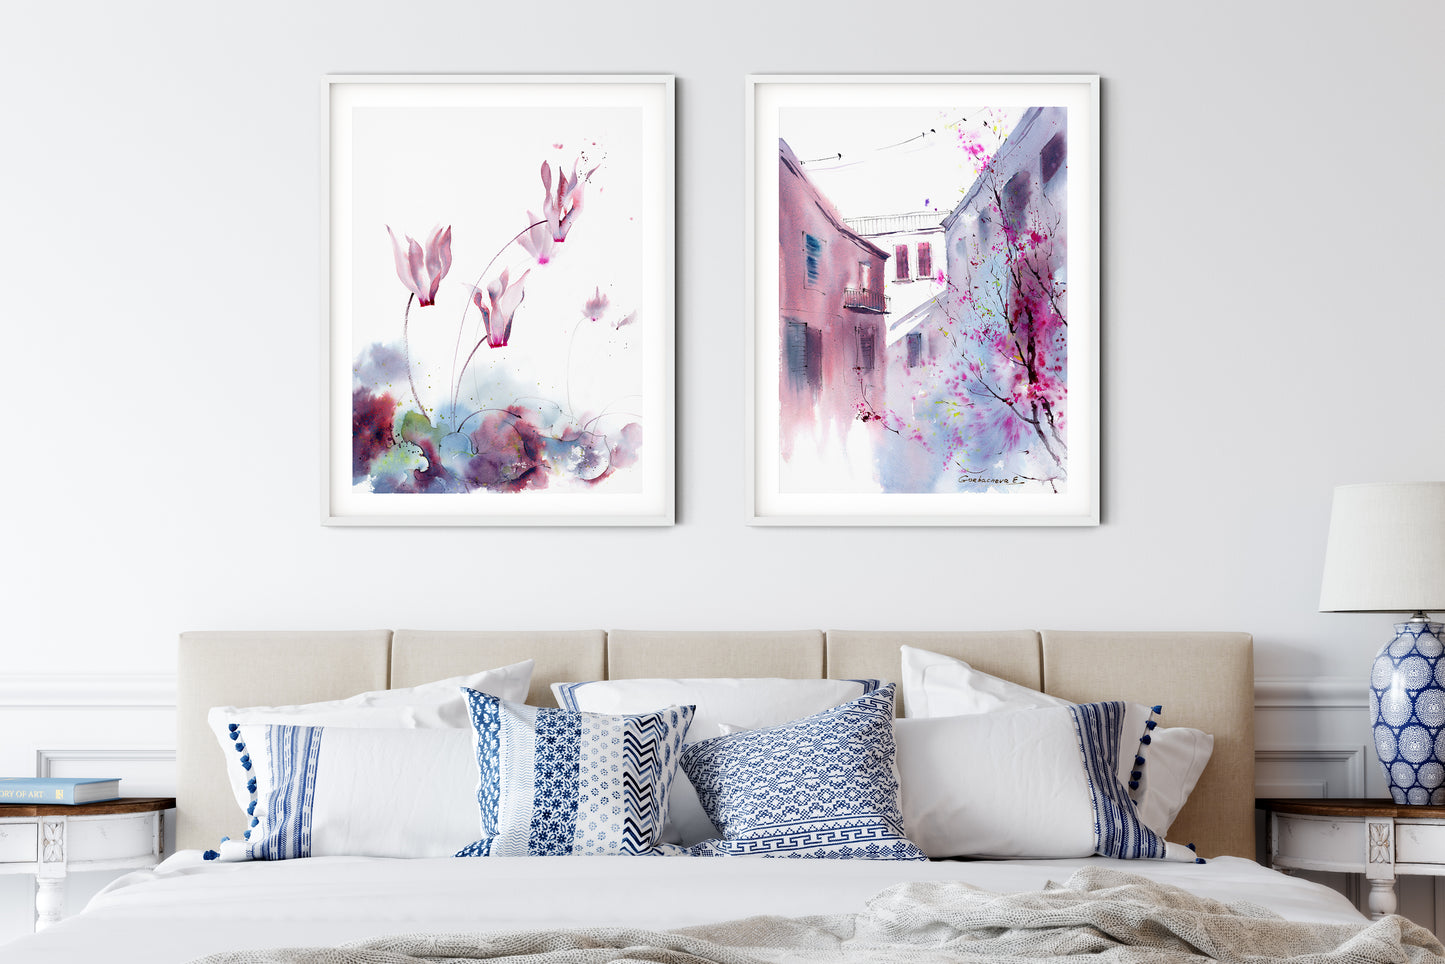 Floral Watercolor Blush Flower Print Set, Italian Patio & Flowers in Pastel Tones, Perfect Wall Art Decor, Ideal Housewarming Gift